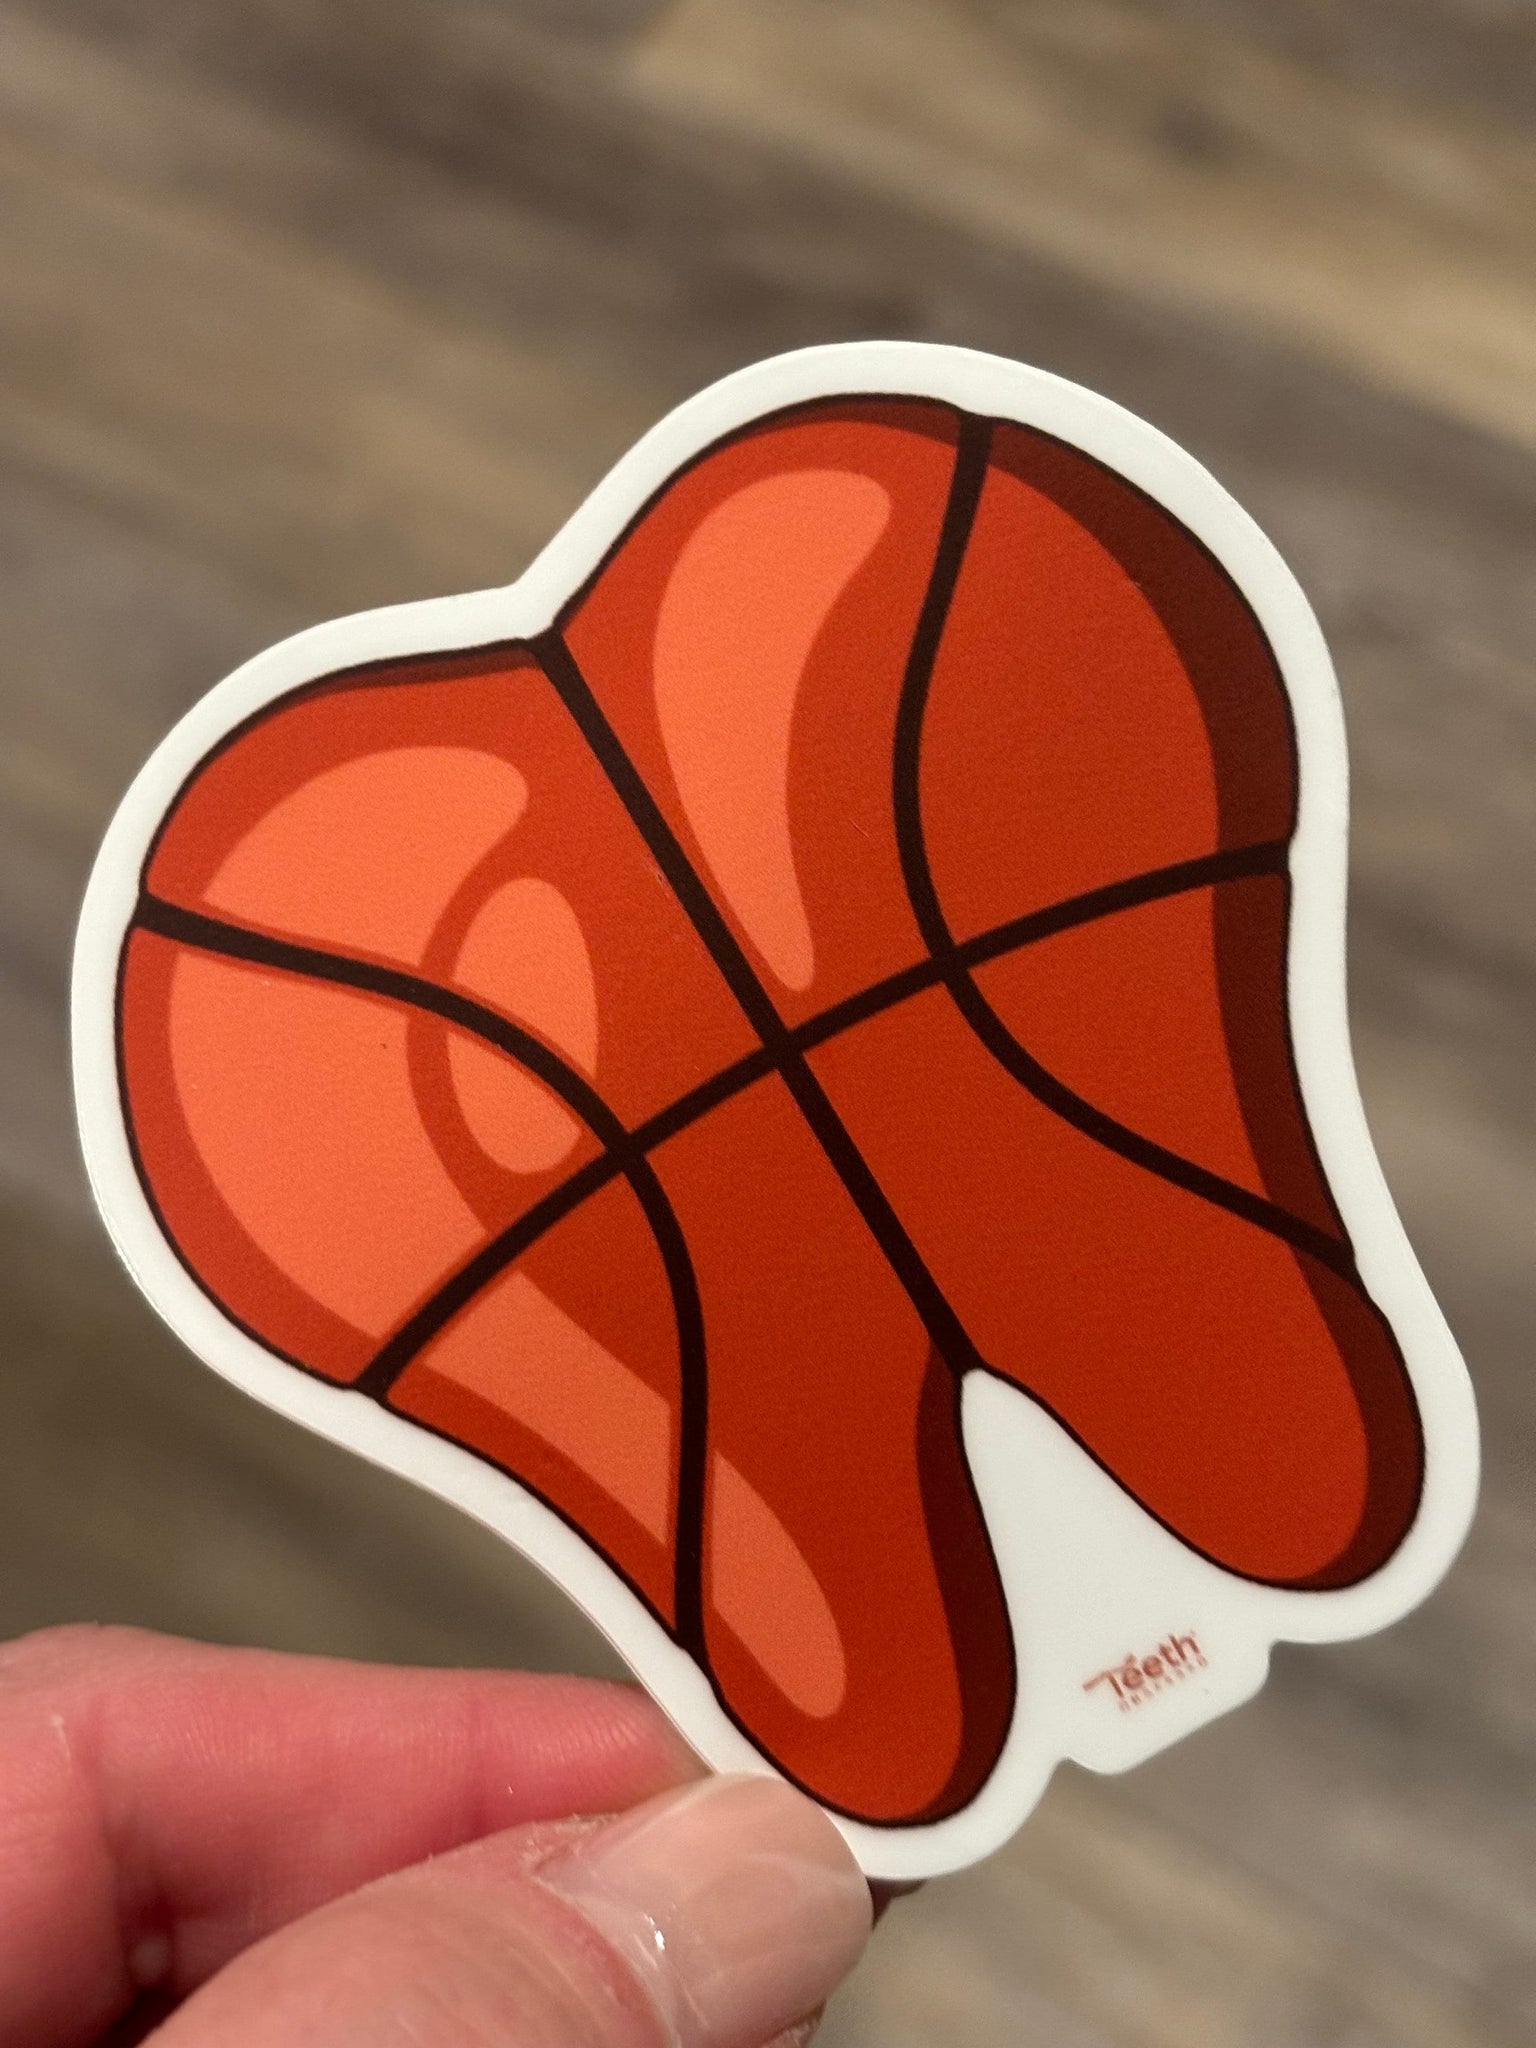 Basketball Teeth Stickers, Dental Stickers, Dental clings, Dental Gifts, Dental Hygiene Sticker, Dental Sports Stickers